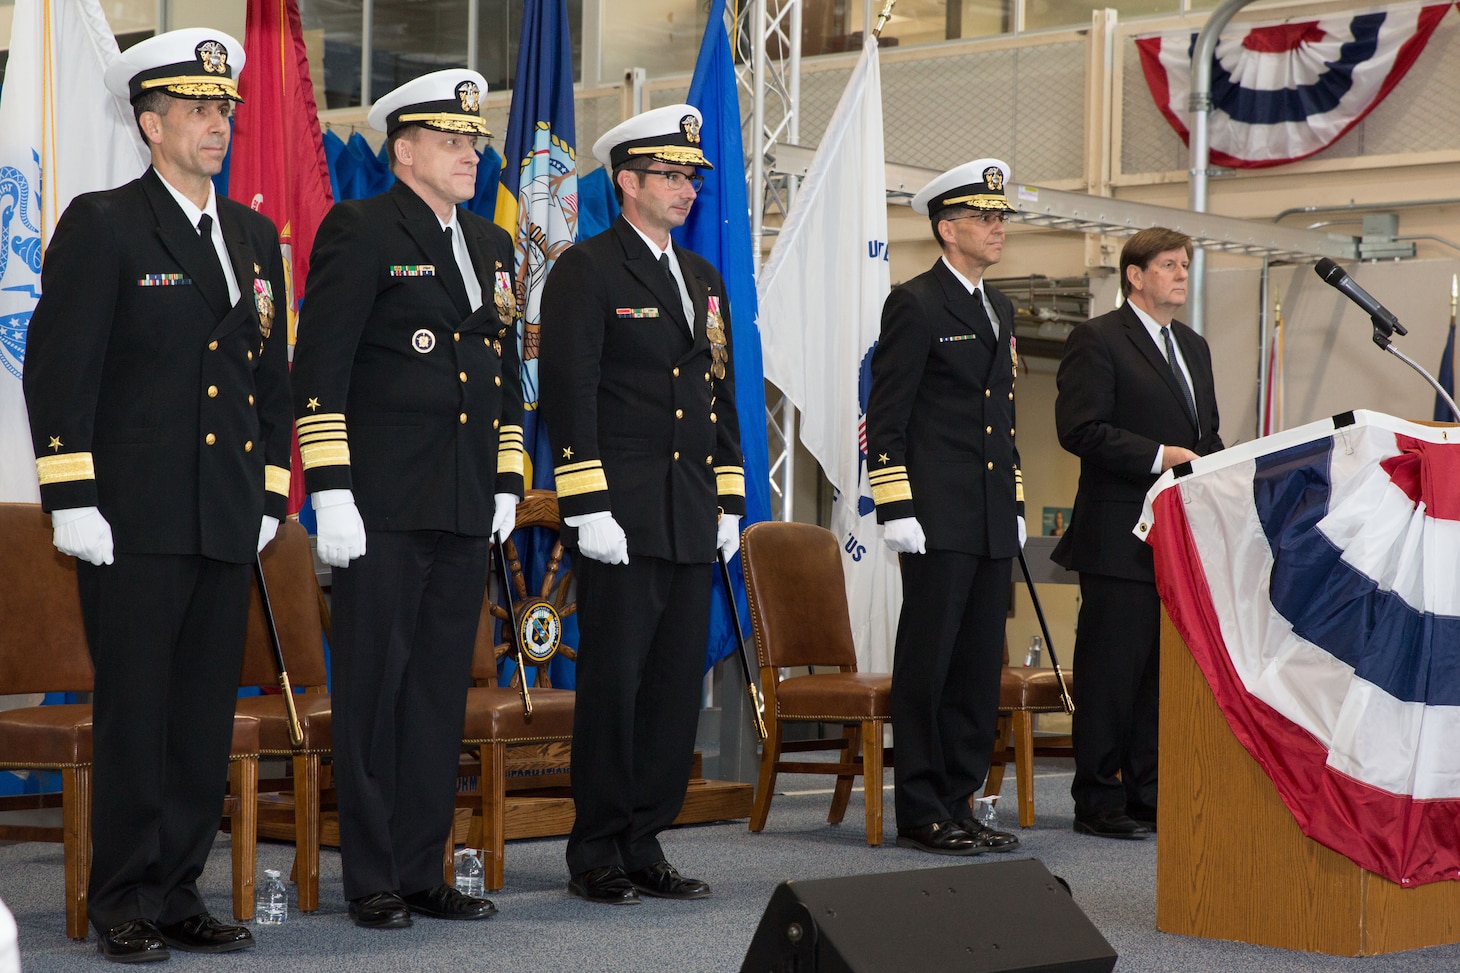 Group of full dressed officers line up on stage behind a podium to prepare for a change of command